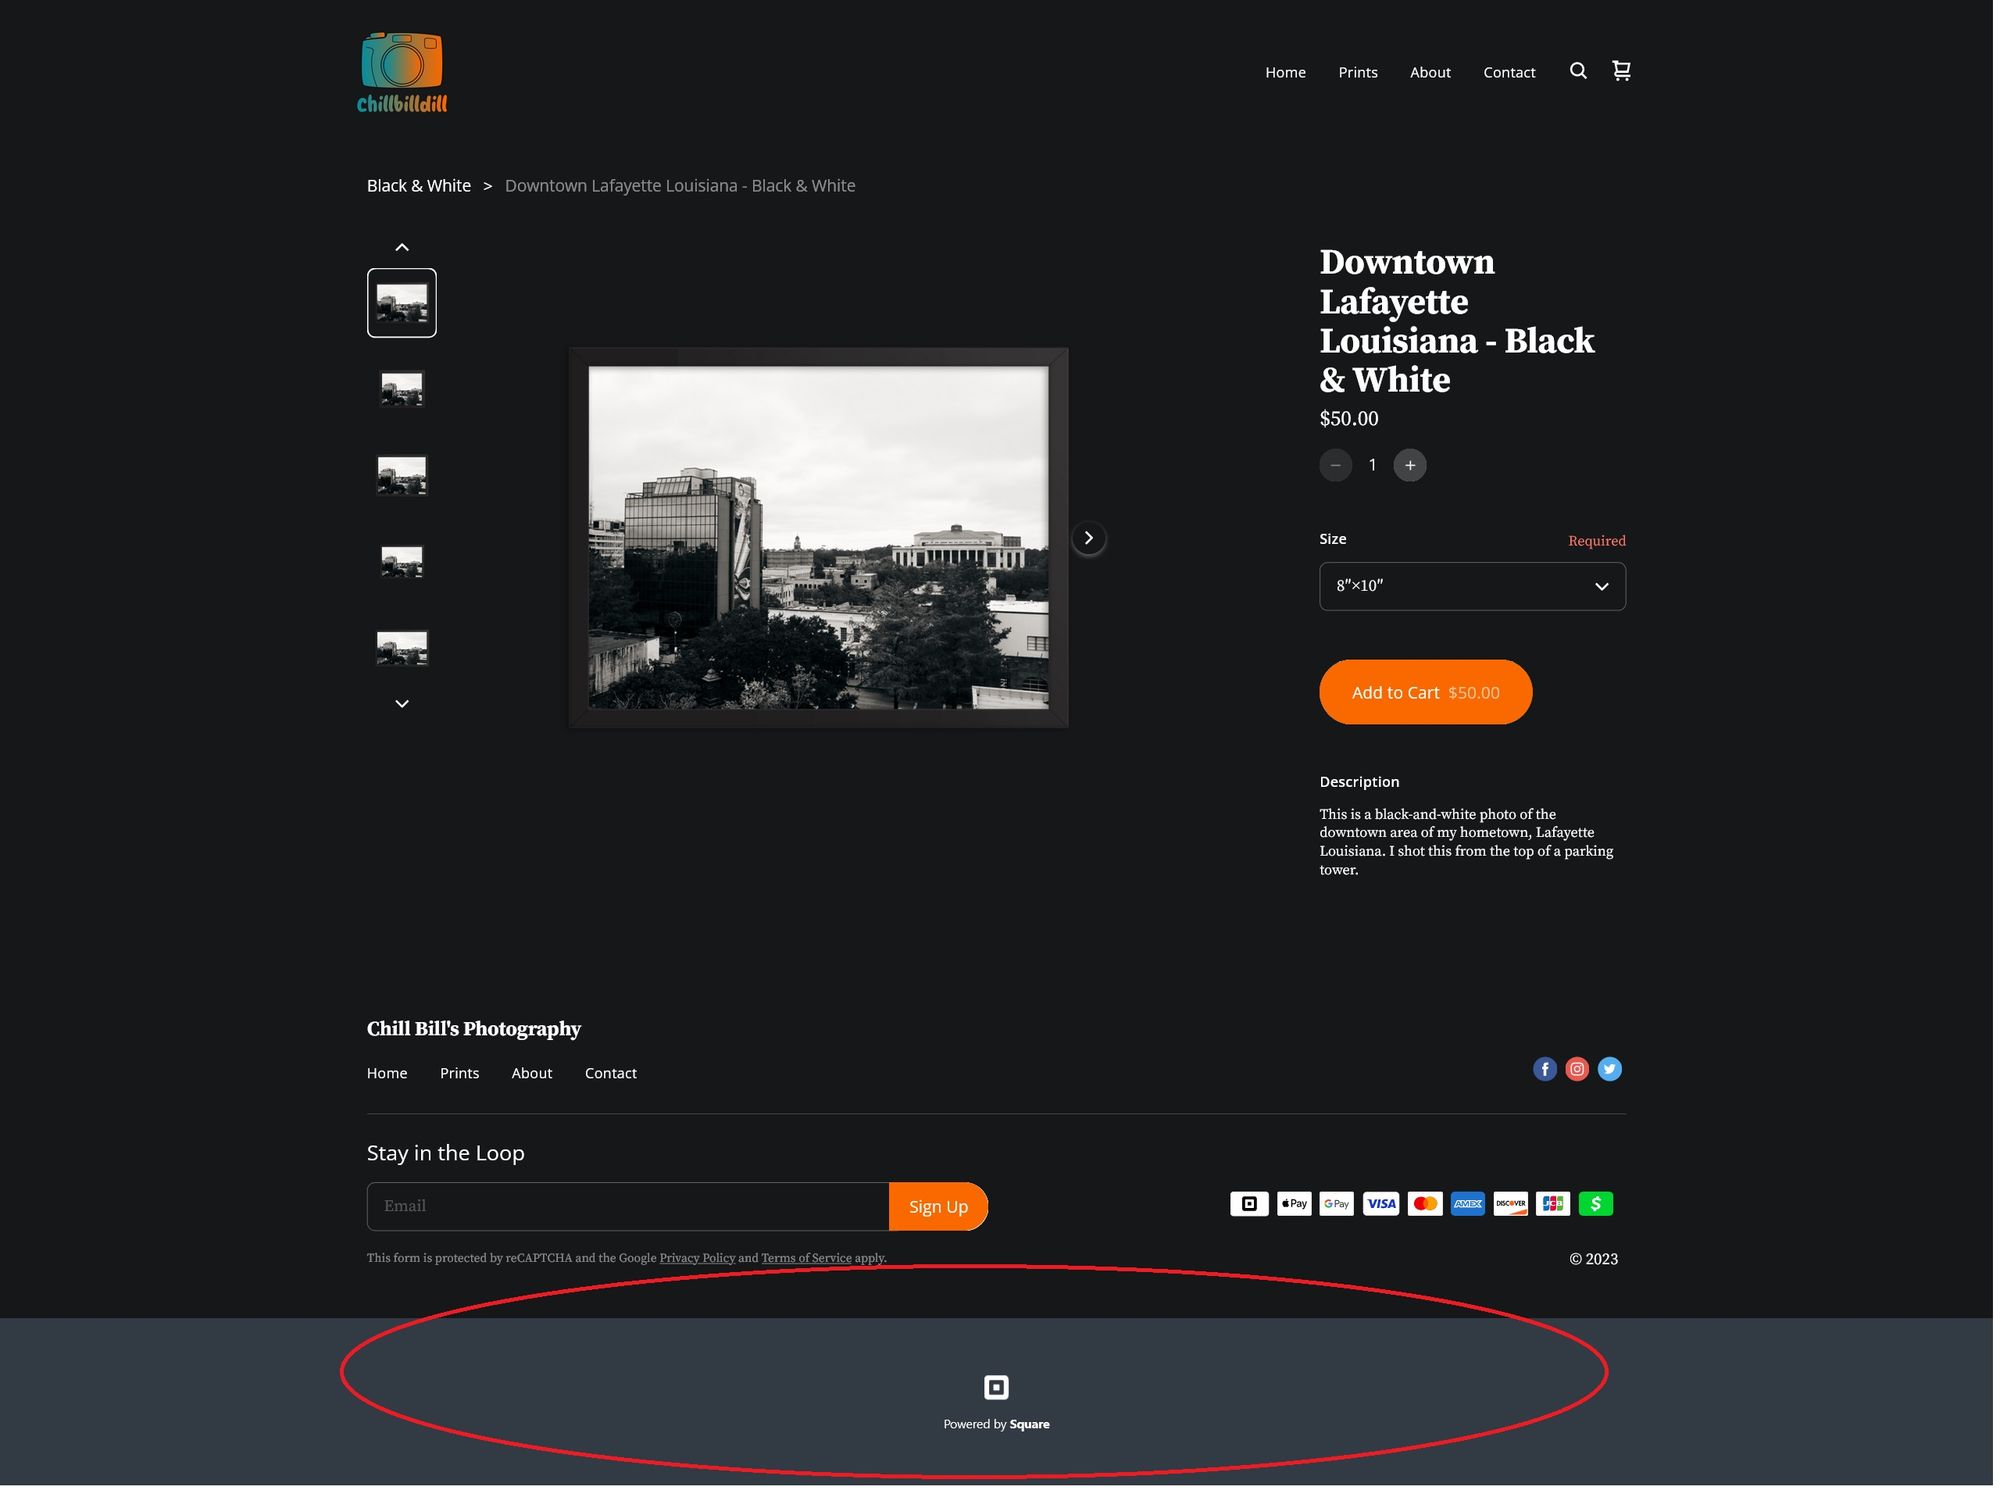 screenshot of the Square branding (circled in red) in the footer of my website on the free tier, this can be removed if you use the paid plan